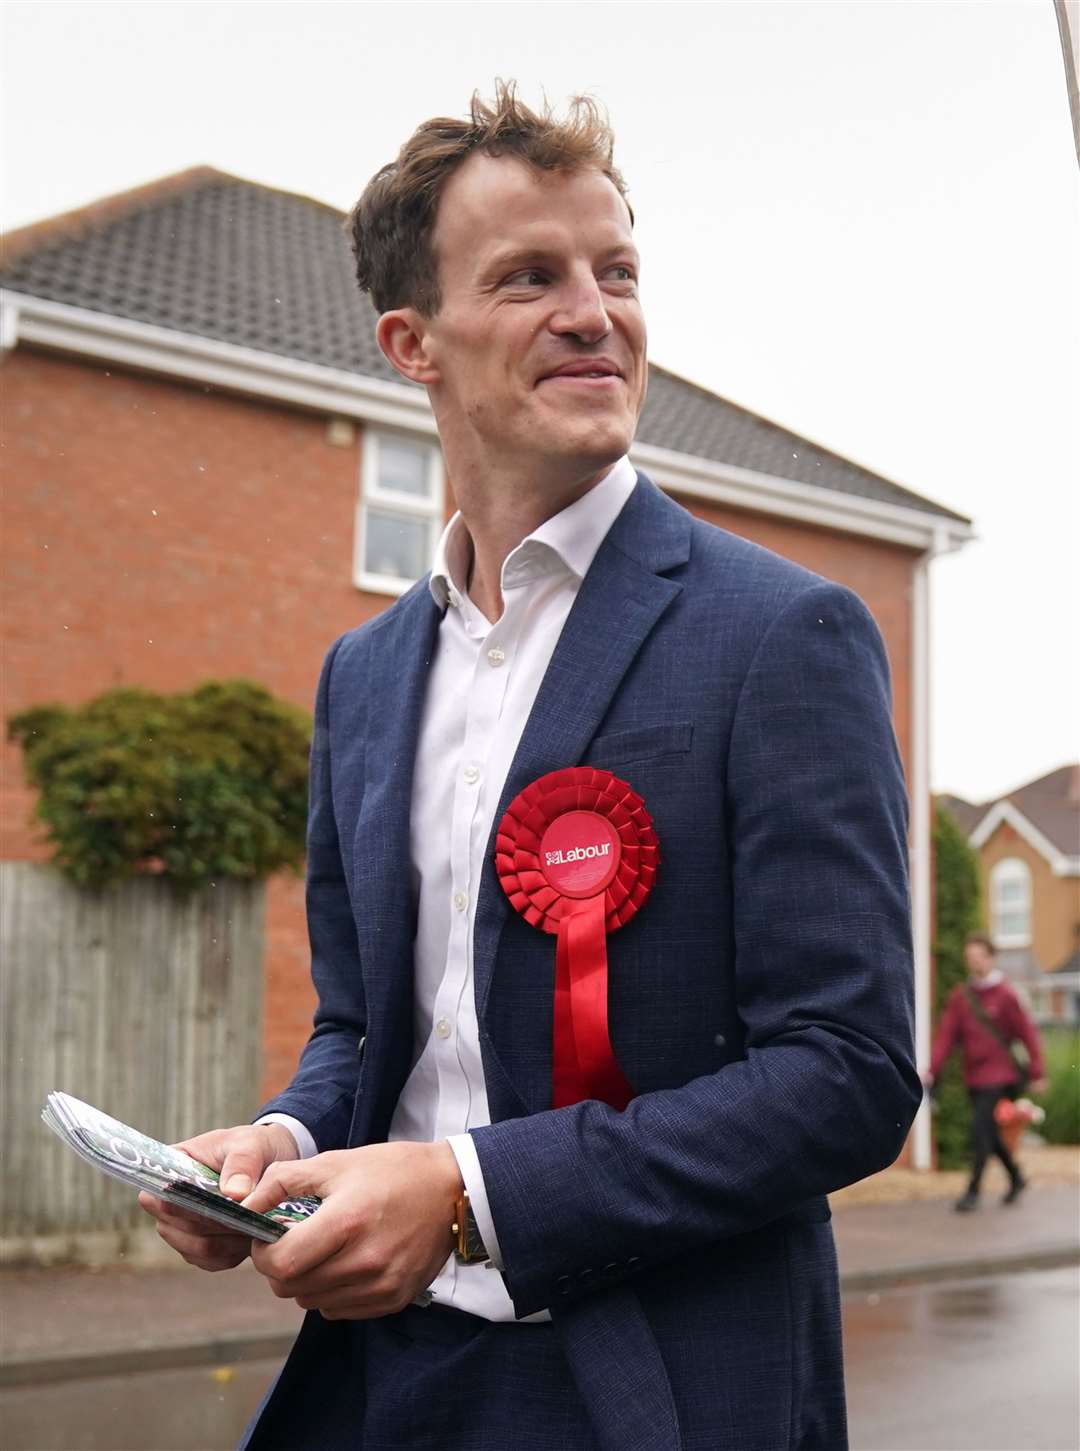 Labour candidate Alistair Strathern (PA)